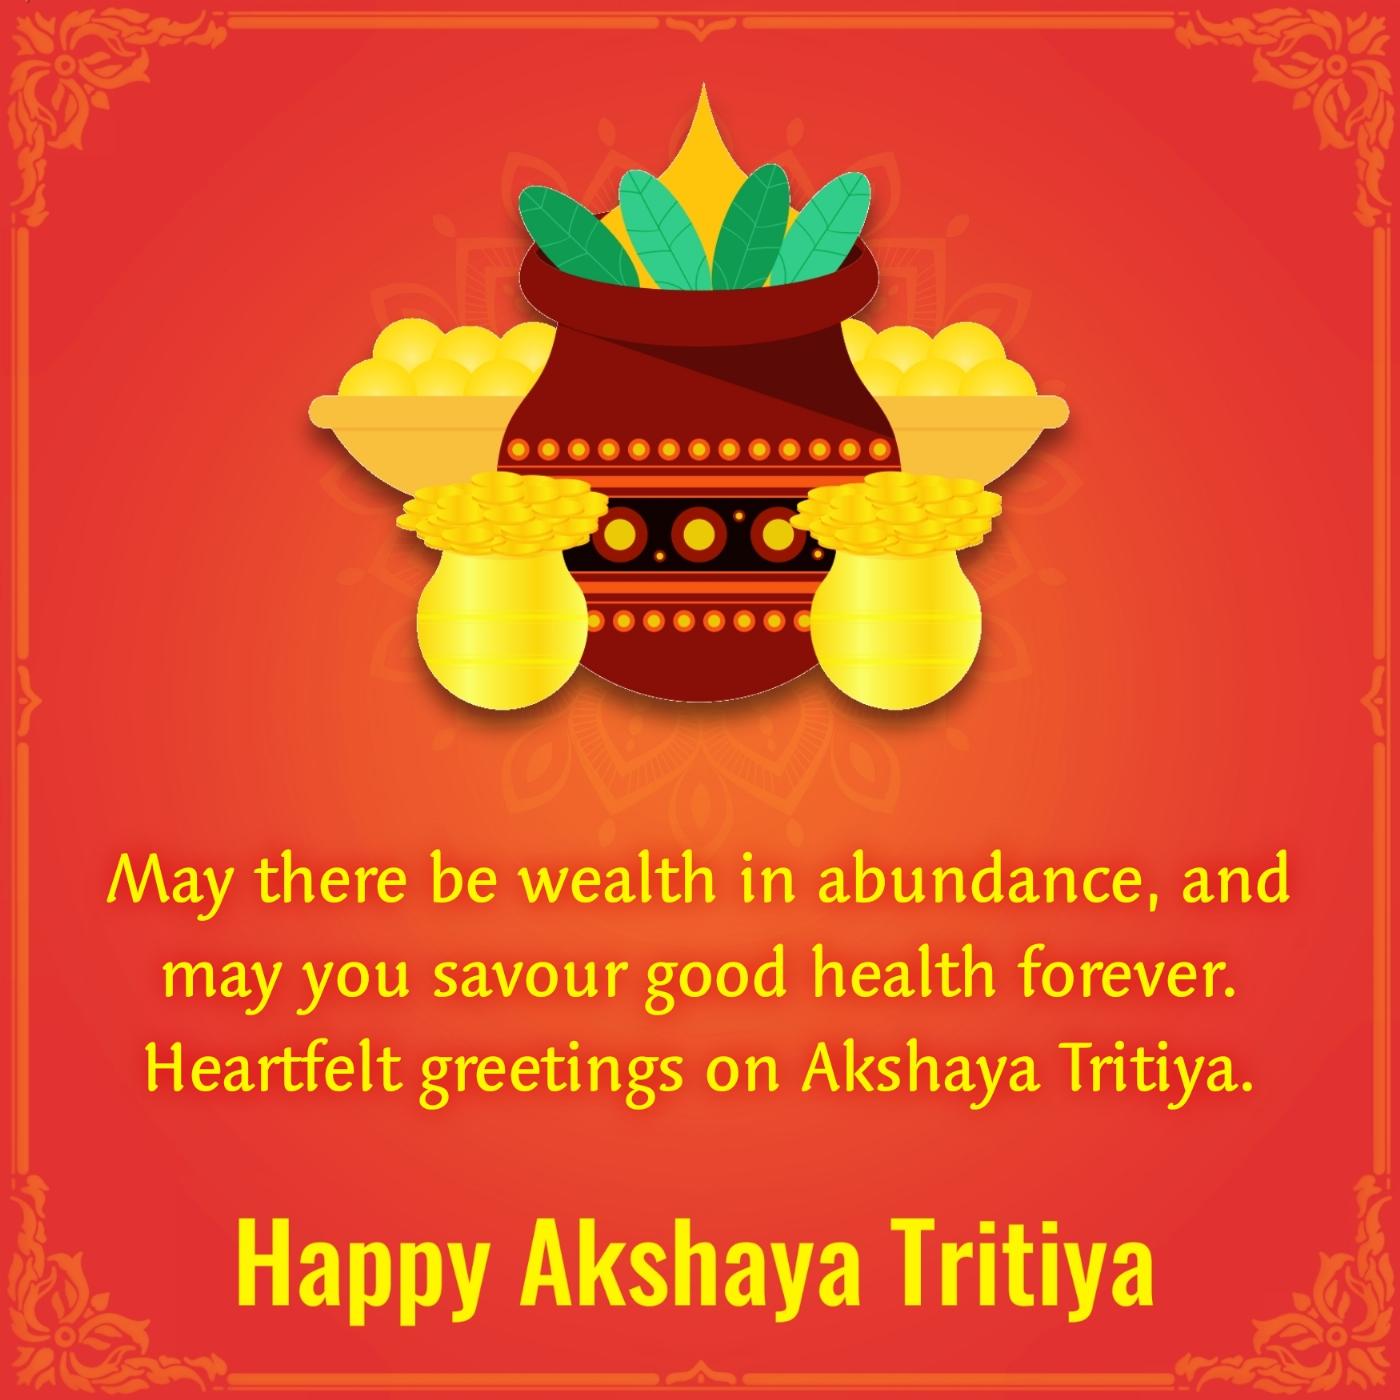 May there be wealth in abundance and may you savour good health